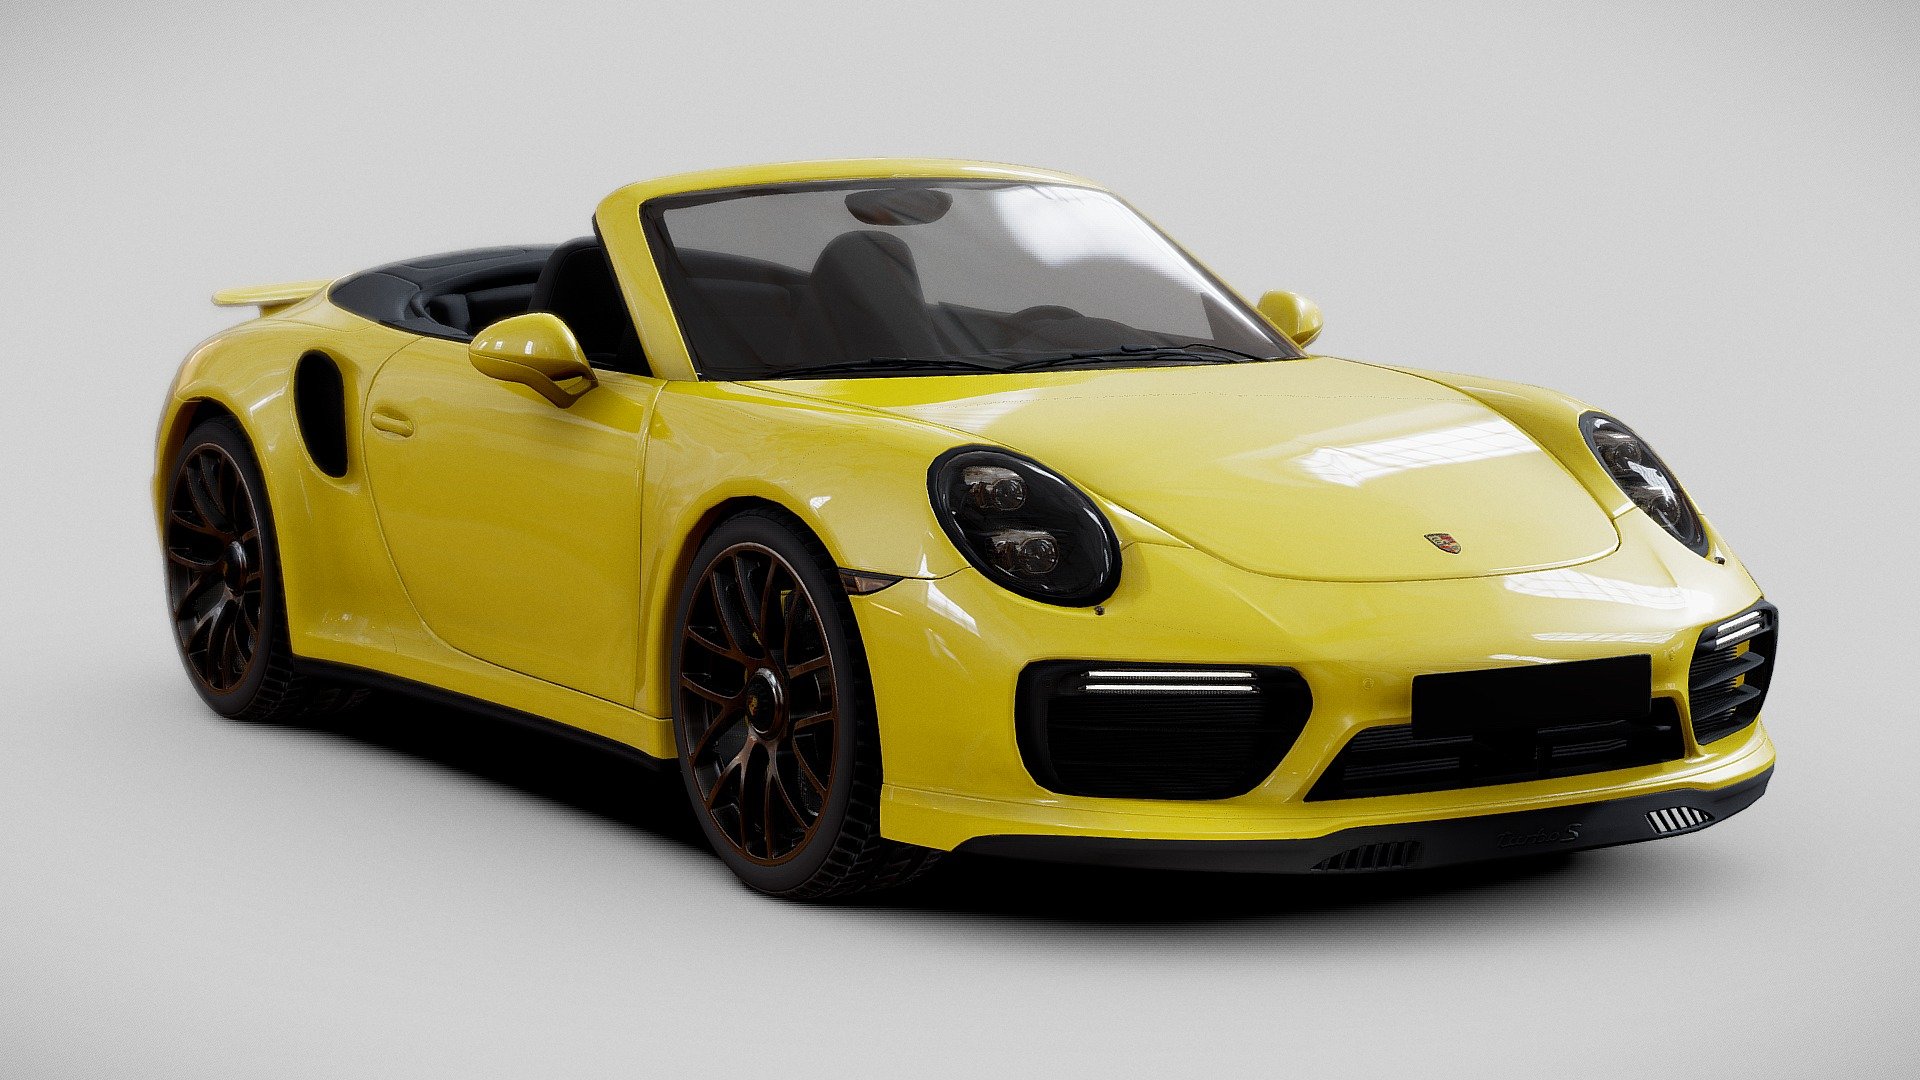 Porsche 911 Turbo S Convertible 2016

.

HIGH END / high poly / fully editable / rigable / interiour

by getting this model you have full control on meshes and materials

you can even subdivide all parts for having better looking details.

.

**don't forget to like and share your thoughts!! 🍻 .

.

you can support me by folowing me on instagram

my ig: ZIRODESIGN - Porsche 911 Turbo S Convertible 2016 (30%OFF) - Buy Royalty Free 3D model by ZIRODESIGN 3d model